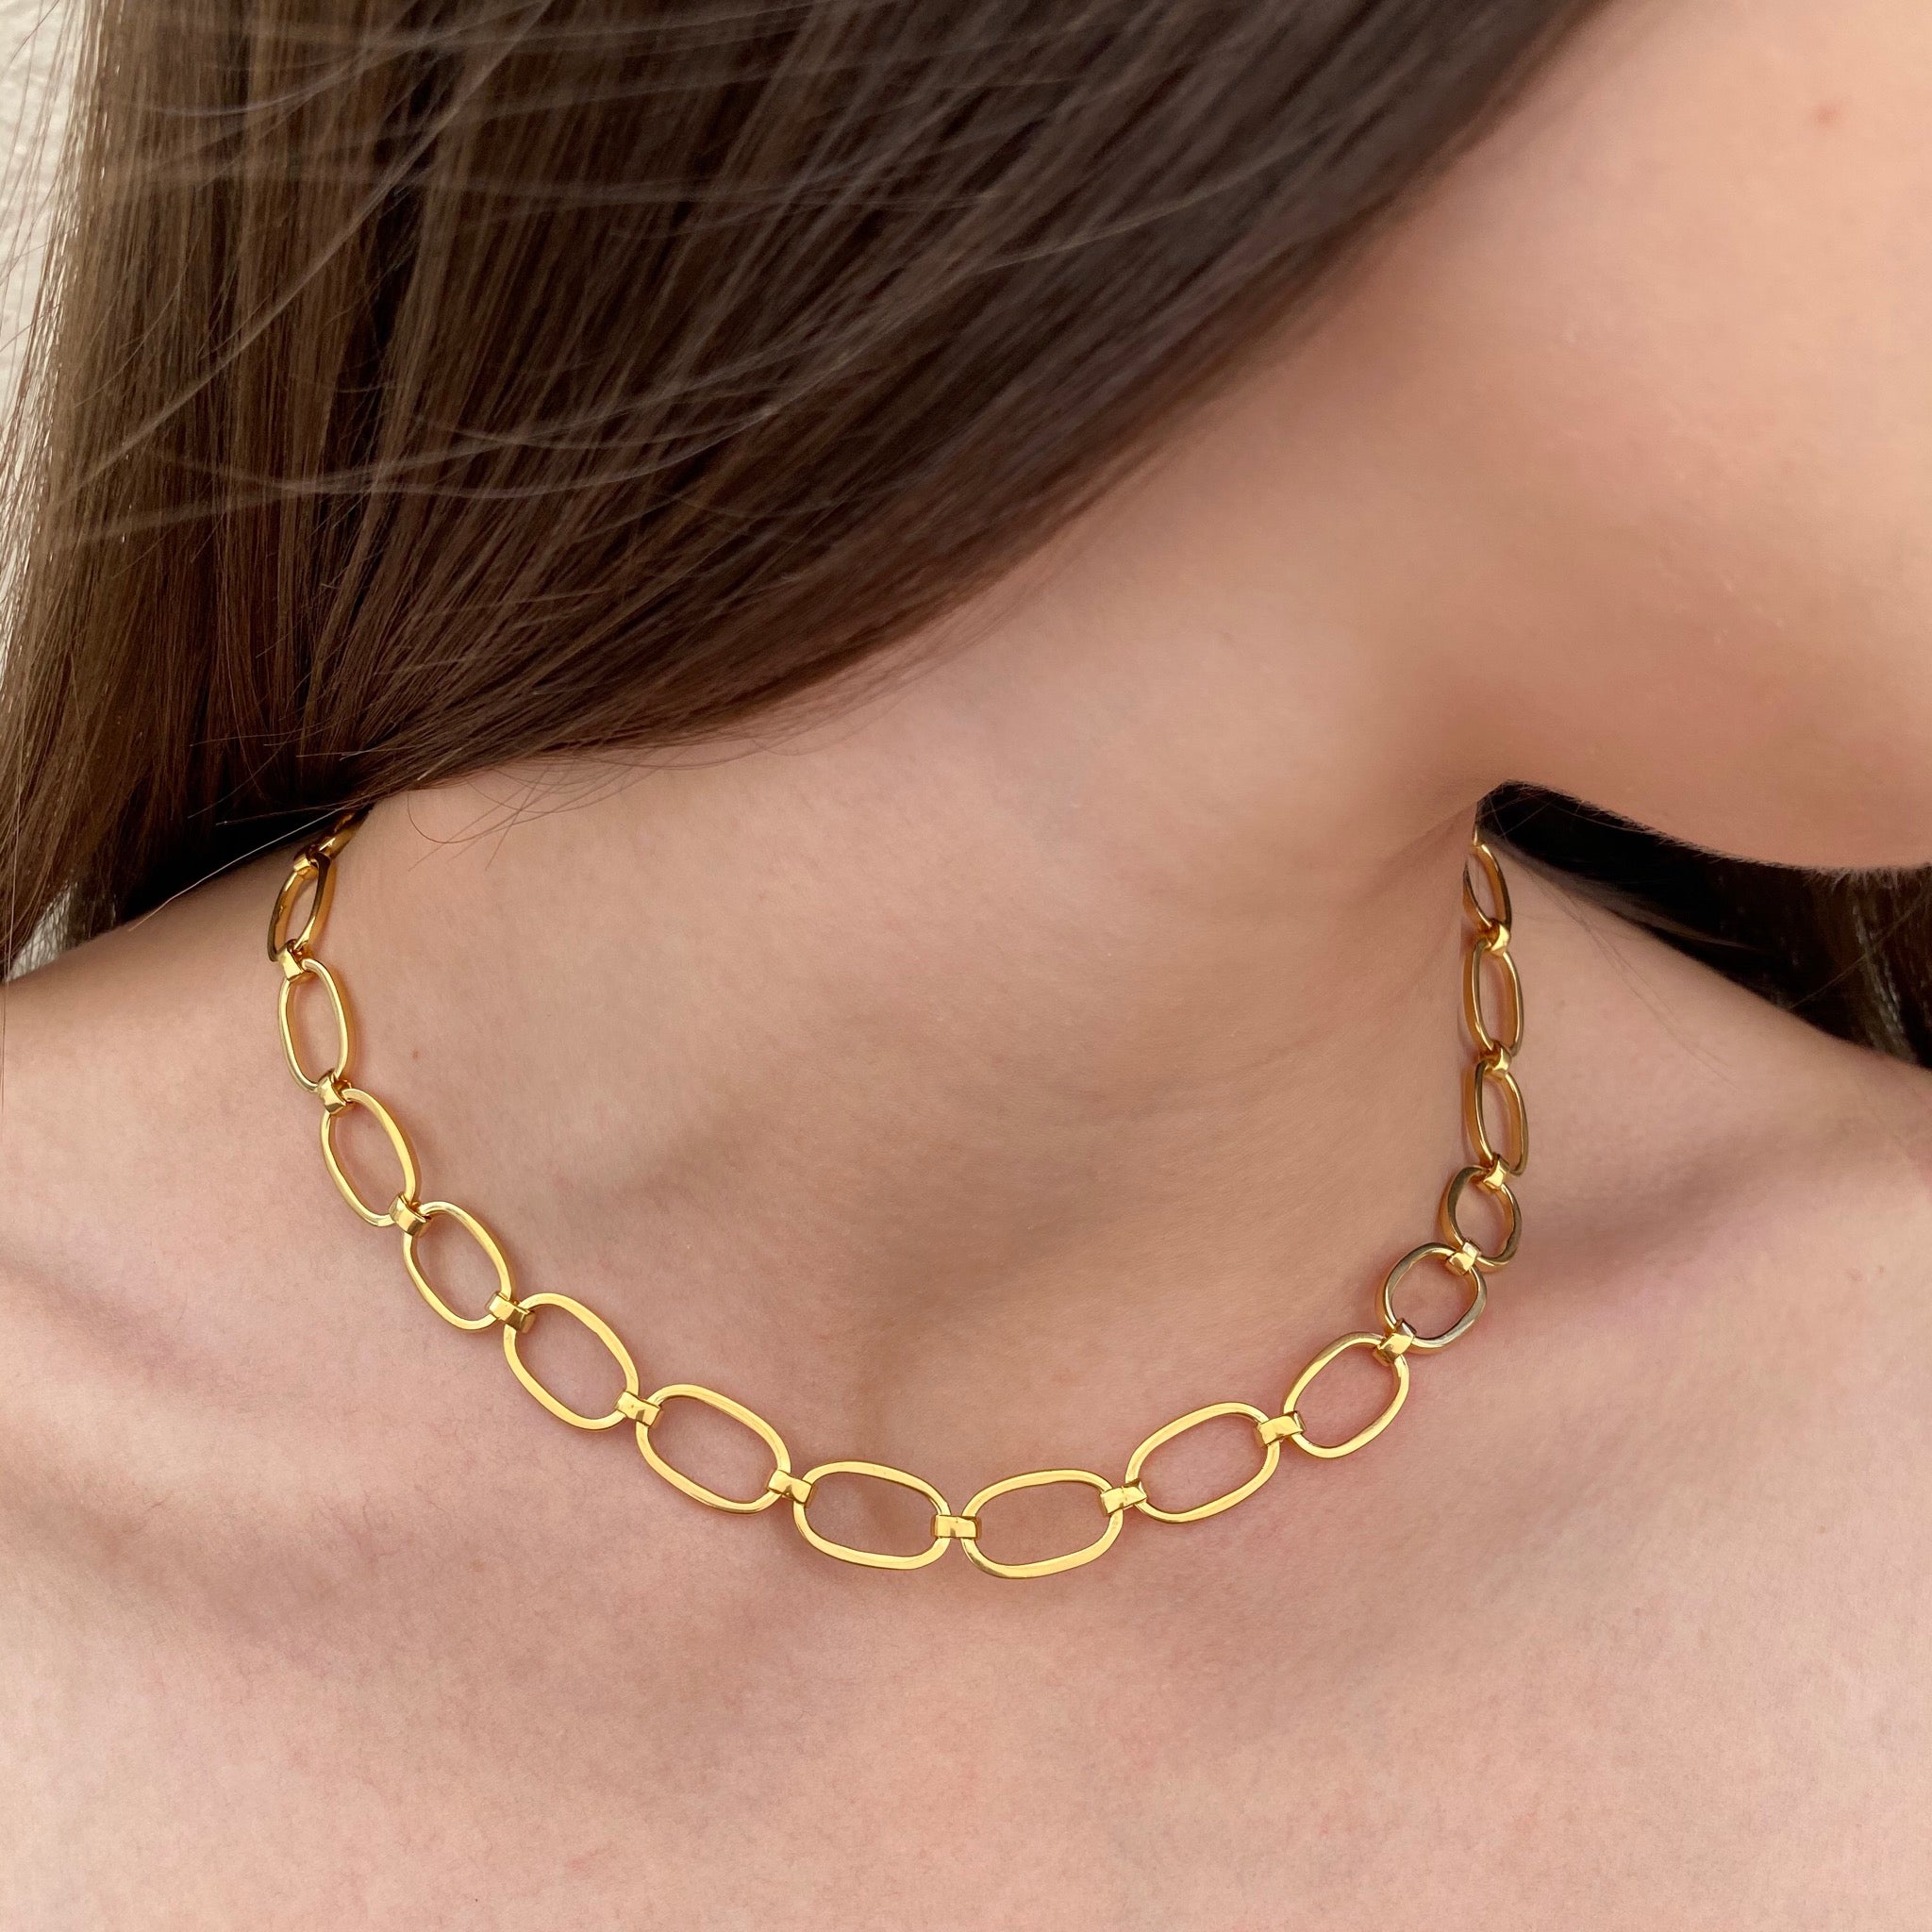 Omega Chain Necklace, Gold